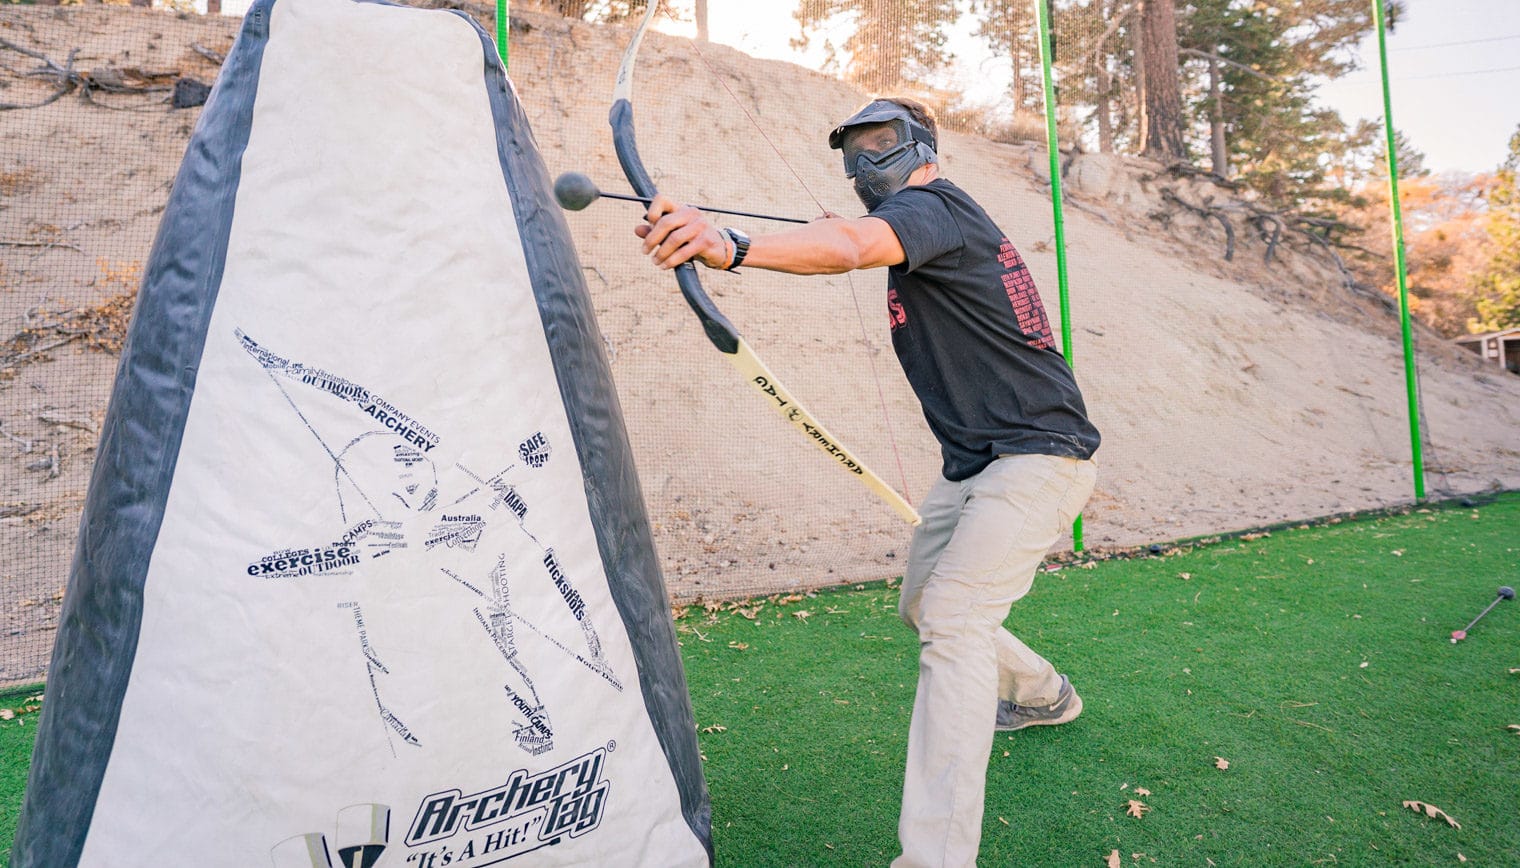 A person aiming a bow and arrow from behind an archery tag barrier.